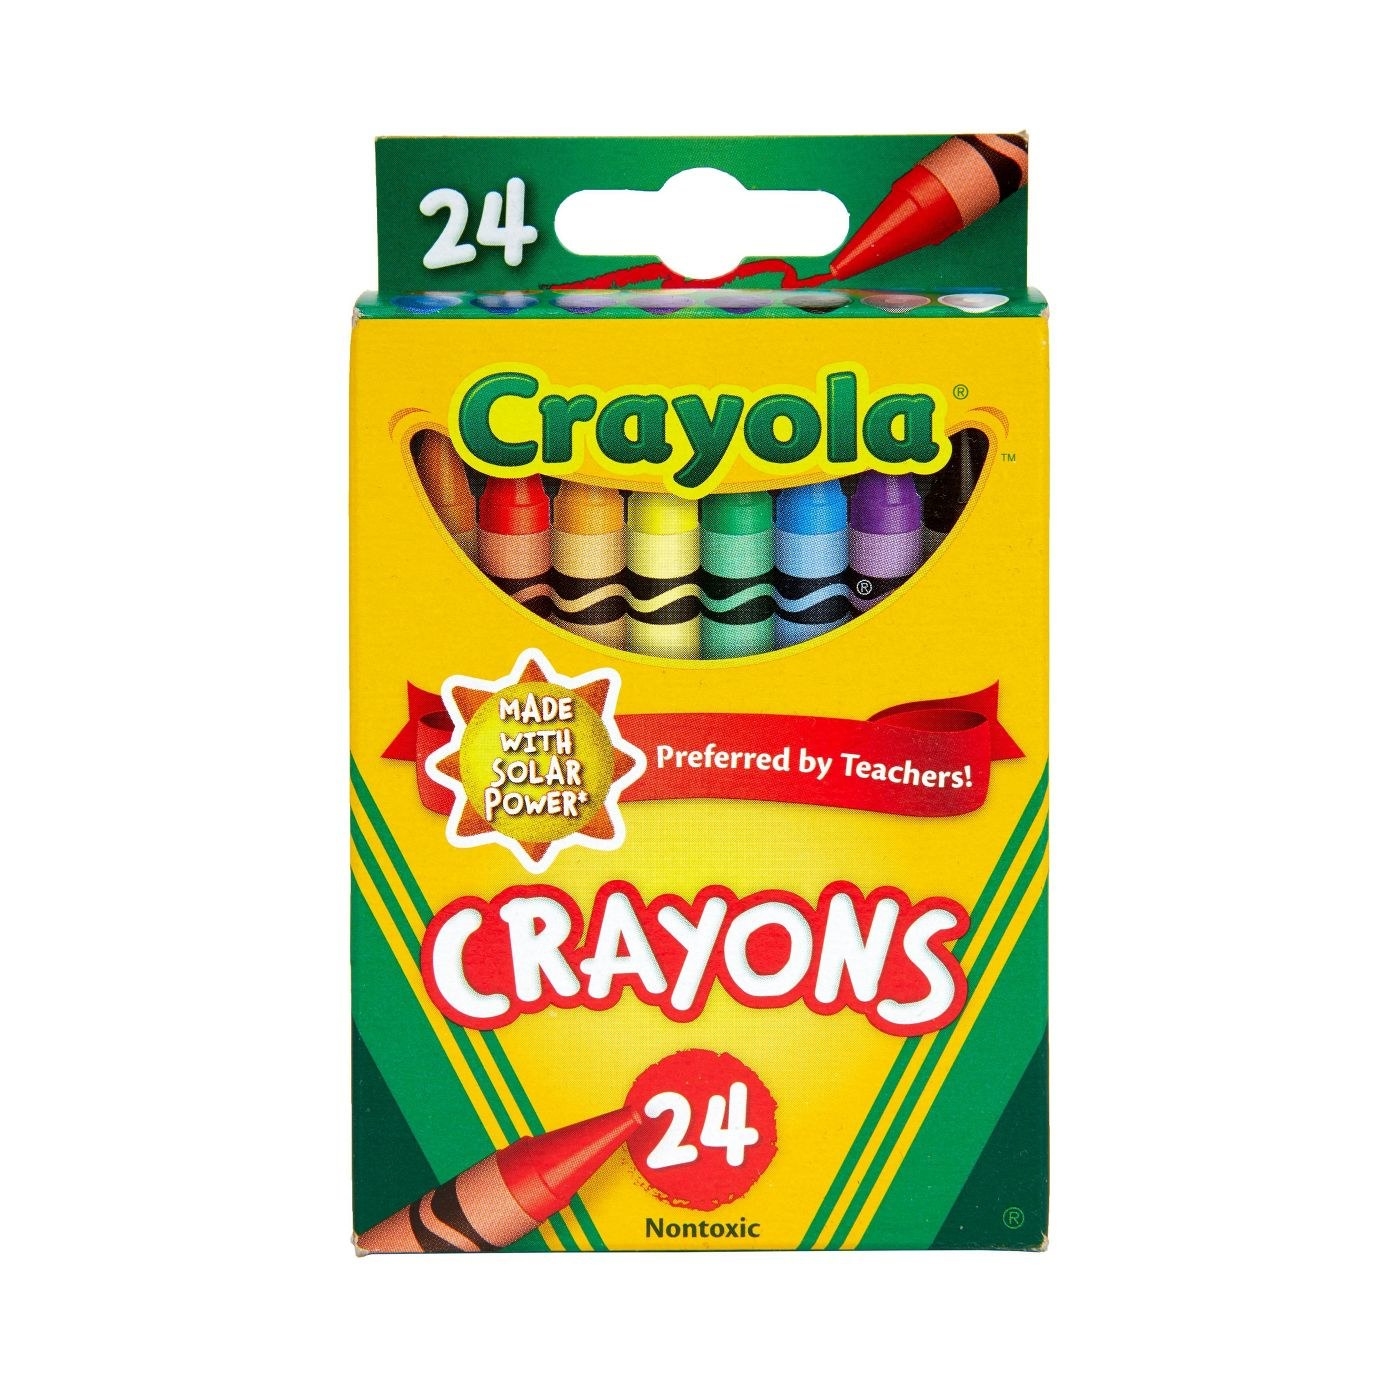 the crayons in yellow and green packaging